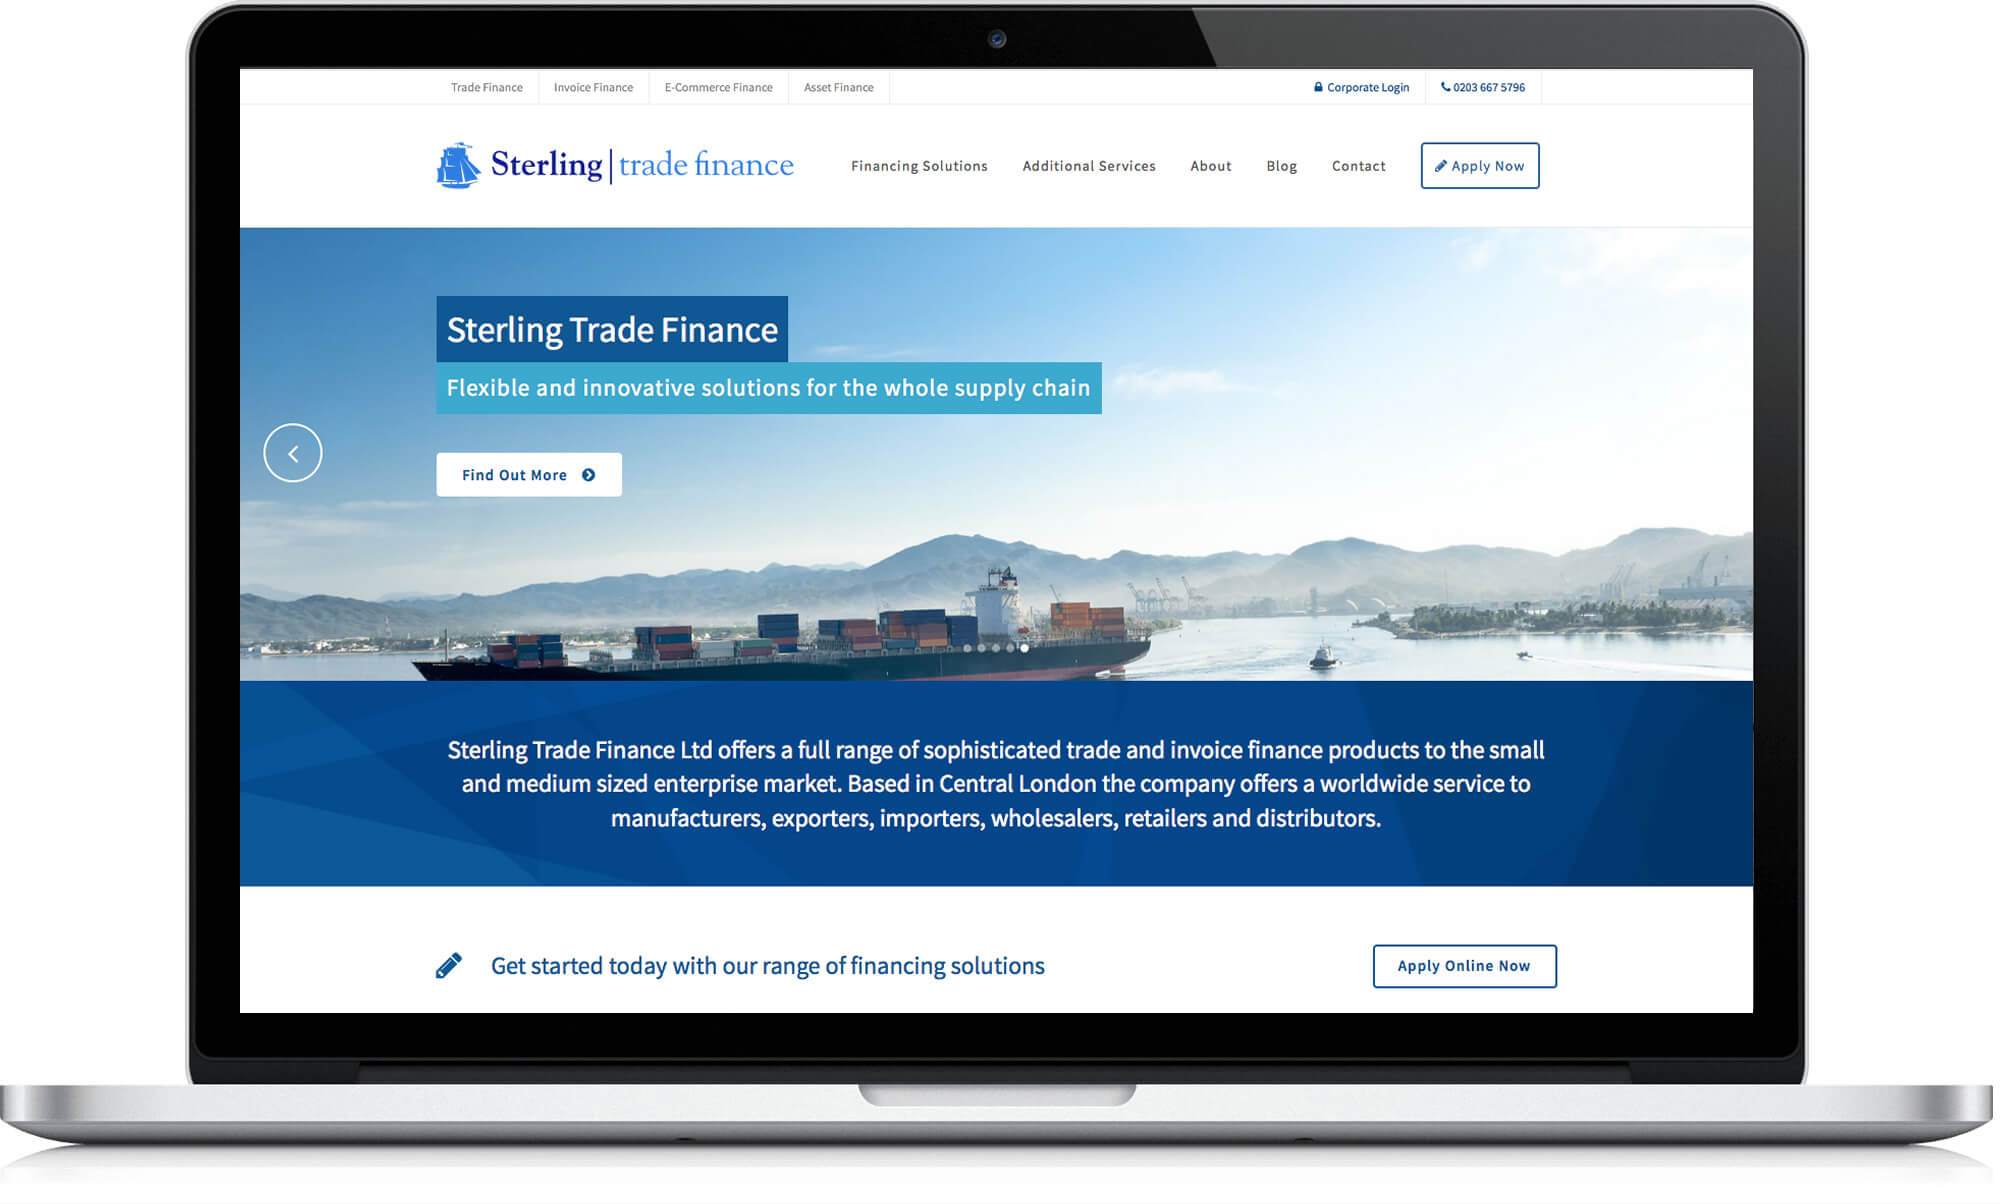 financial marketing solutions for Sterling Trade Finance